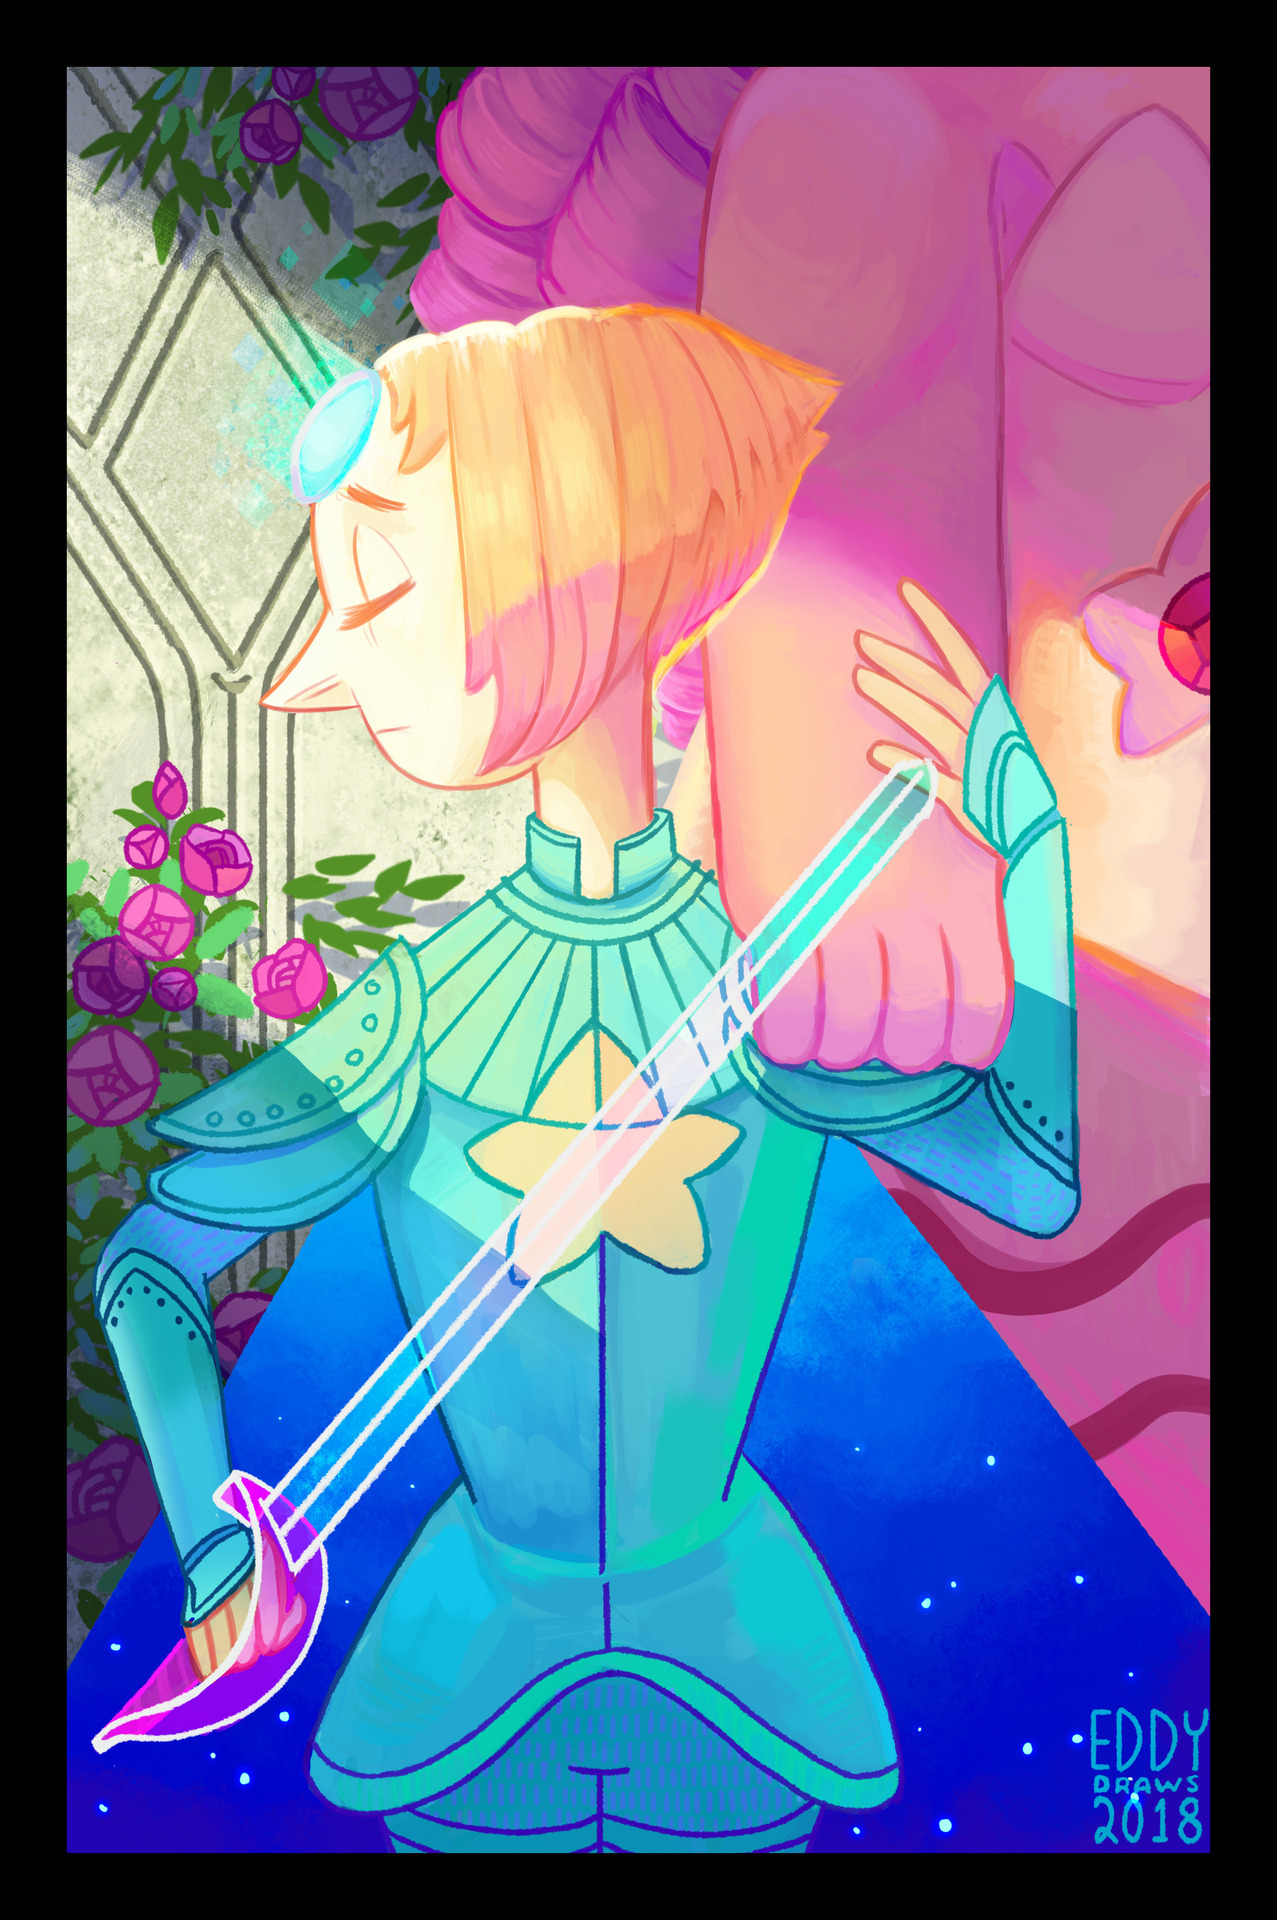 Got time to dabble around in painting! A little SU fanart based on the Knight of Swords